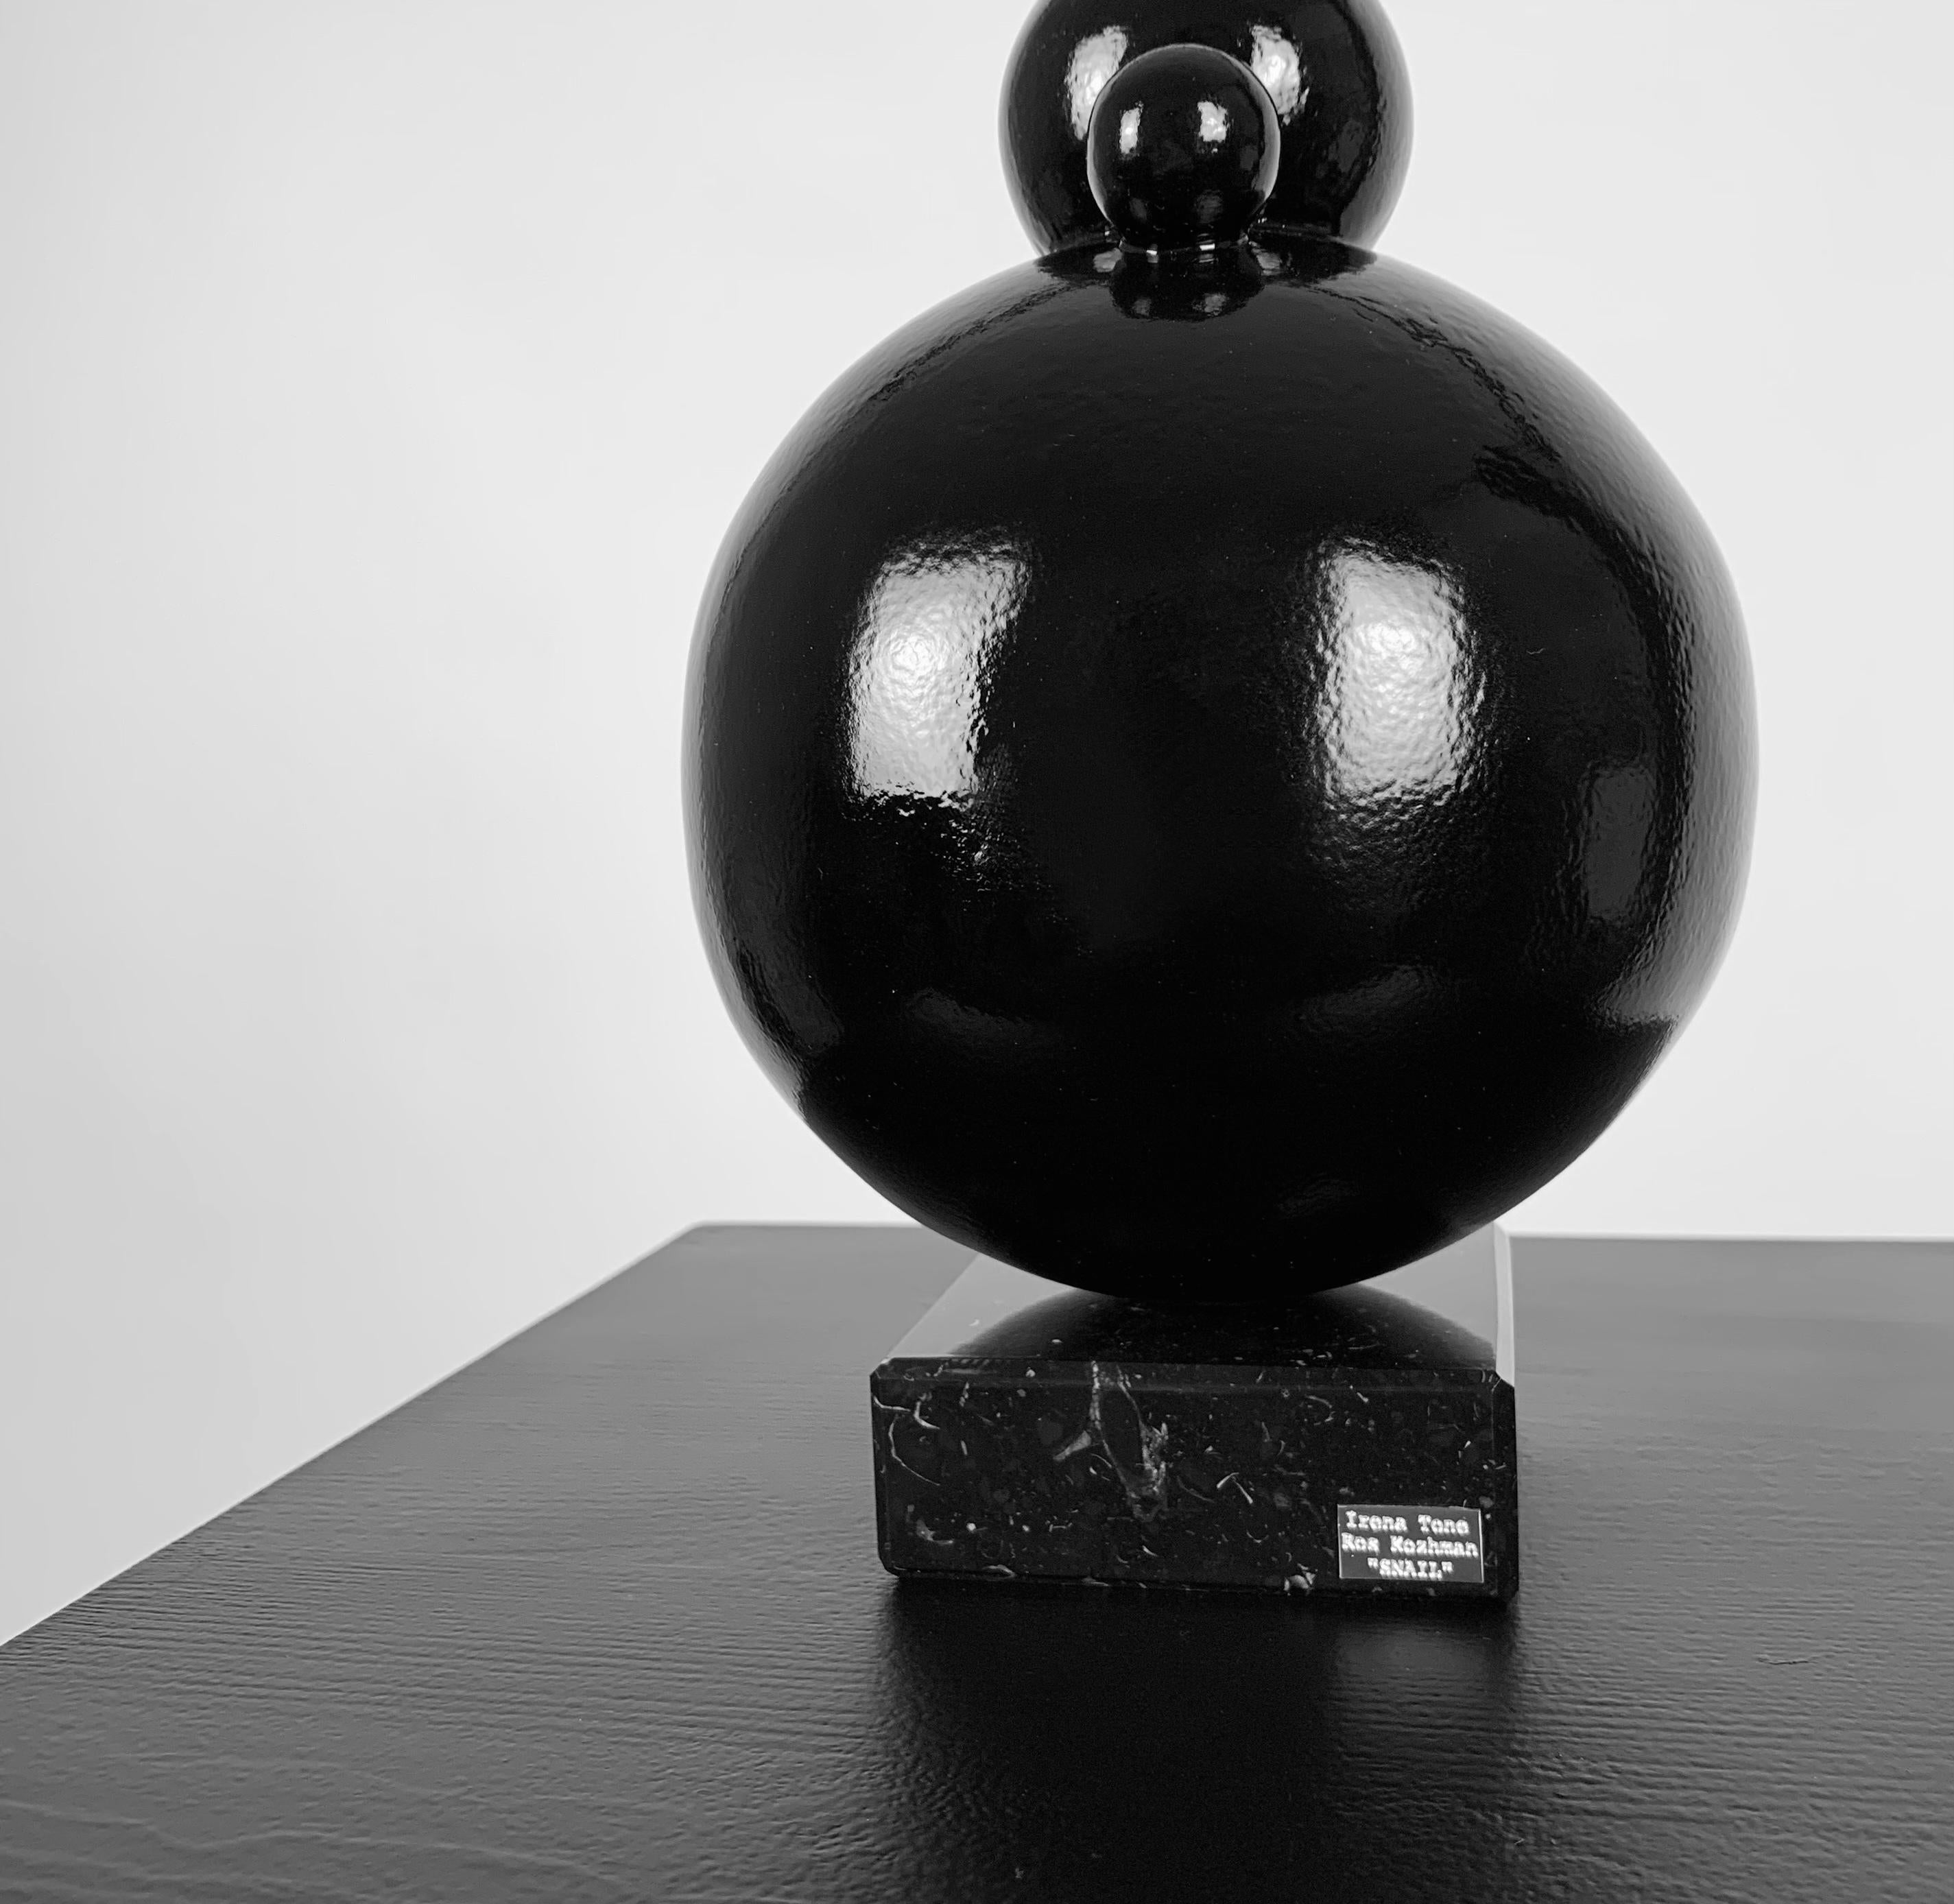 Made in England, 2021.
Created by Award-winning artists IRENA TONE and Rostyslav Kozhman.
Black. Minimalistic. Abstract. Spheres: from molecules to planets. Look around: mono sphere or billions of small combinations of spheres - this all is our